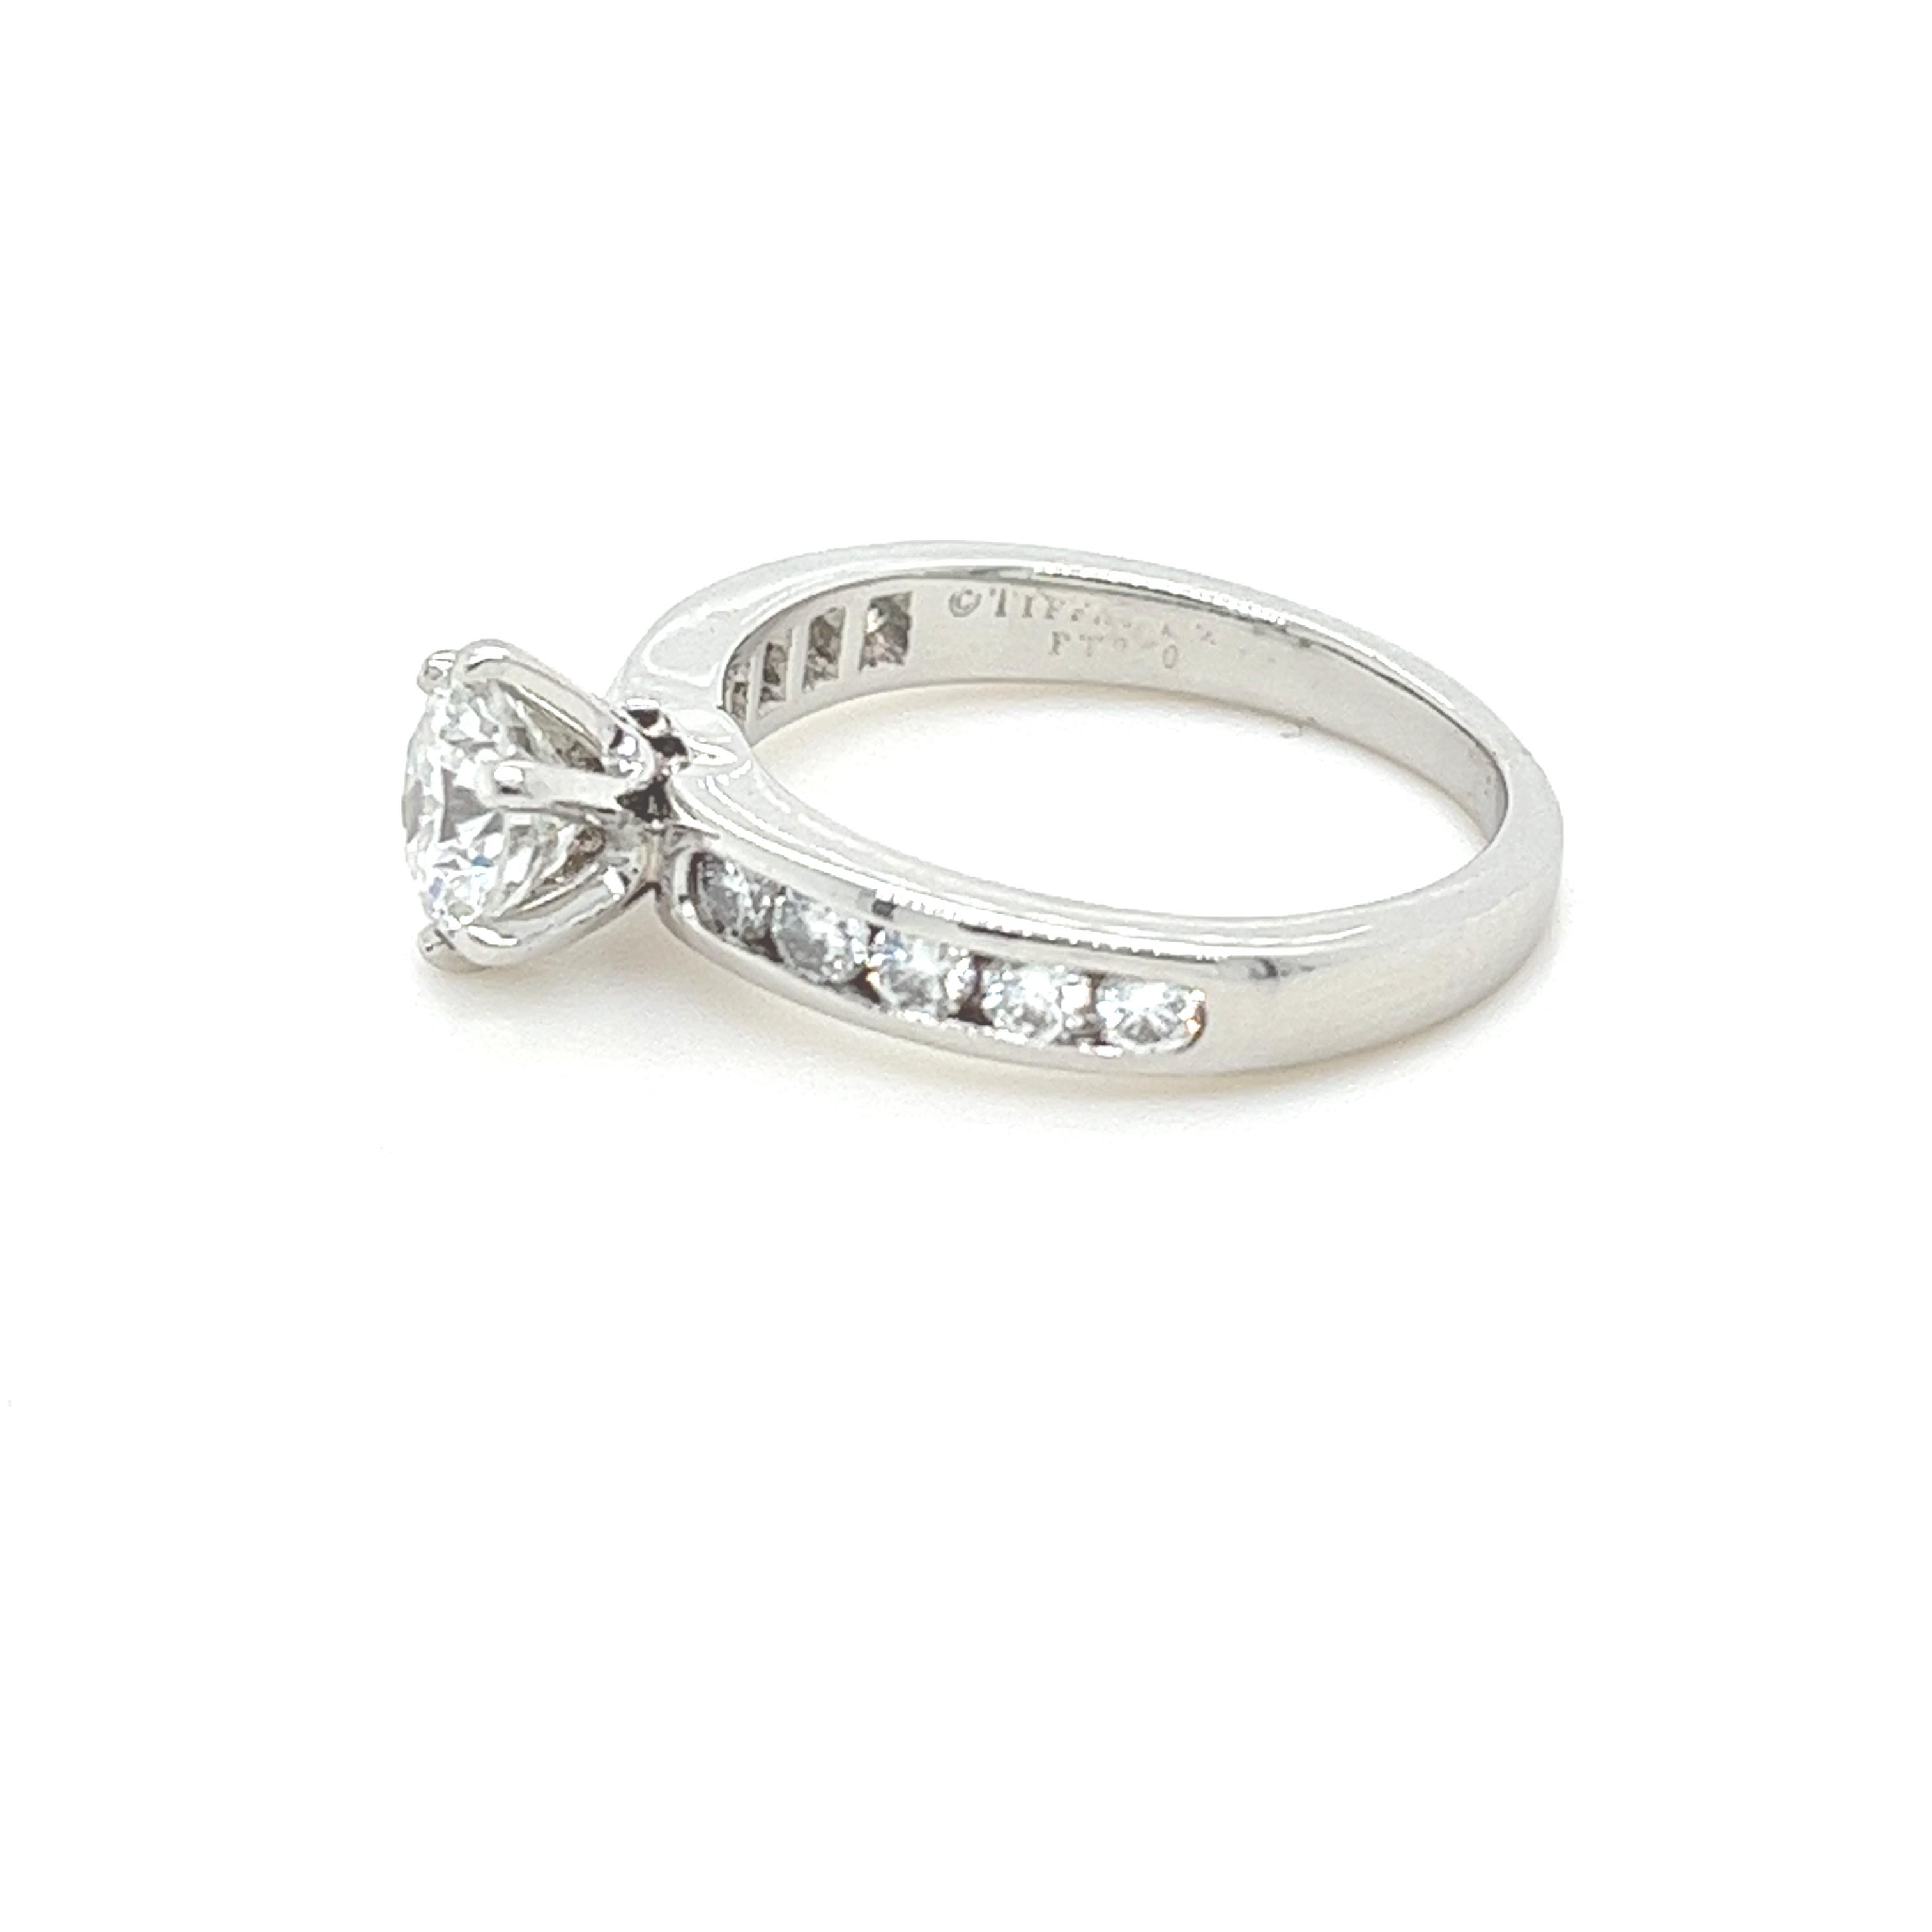 Brilliant Cut Tiffany & Co Diamond Engagement Ring 1.12ct For Sale